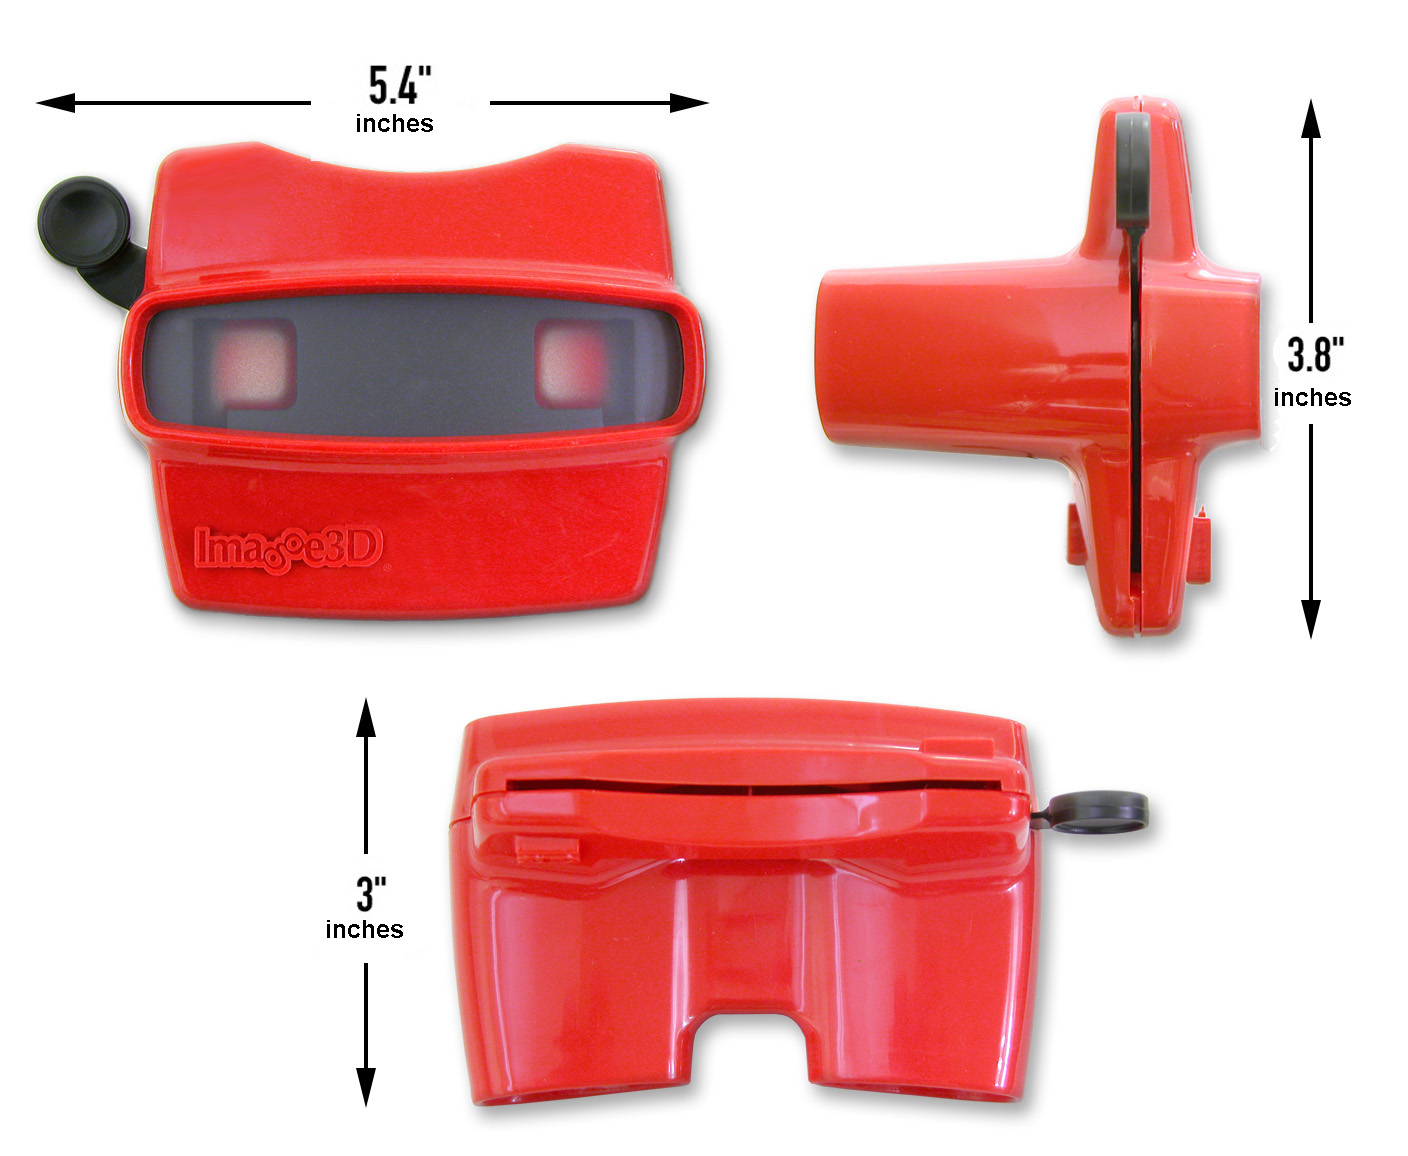 RetroViewer Product Dimensions / Image3D